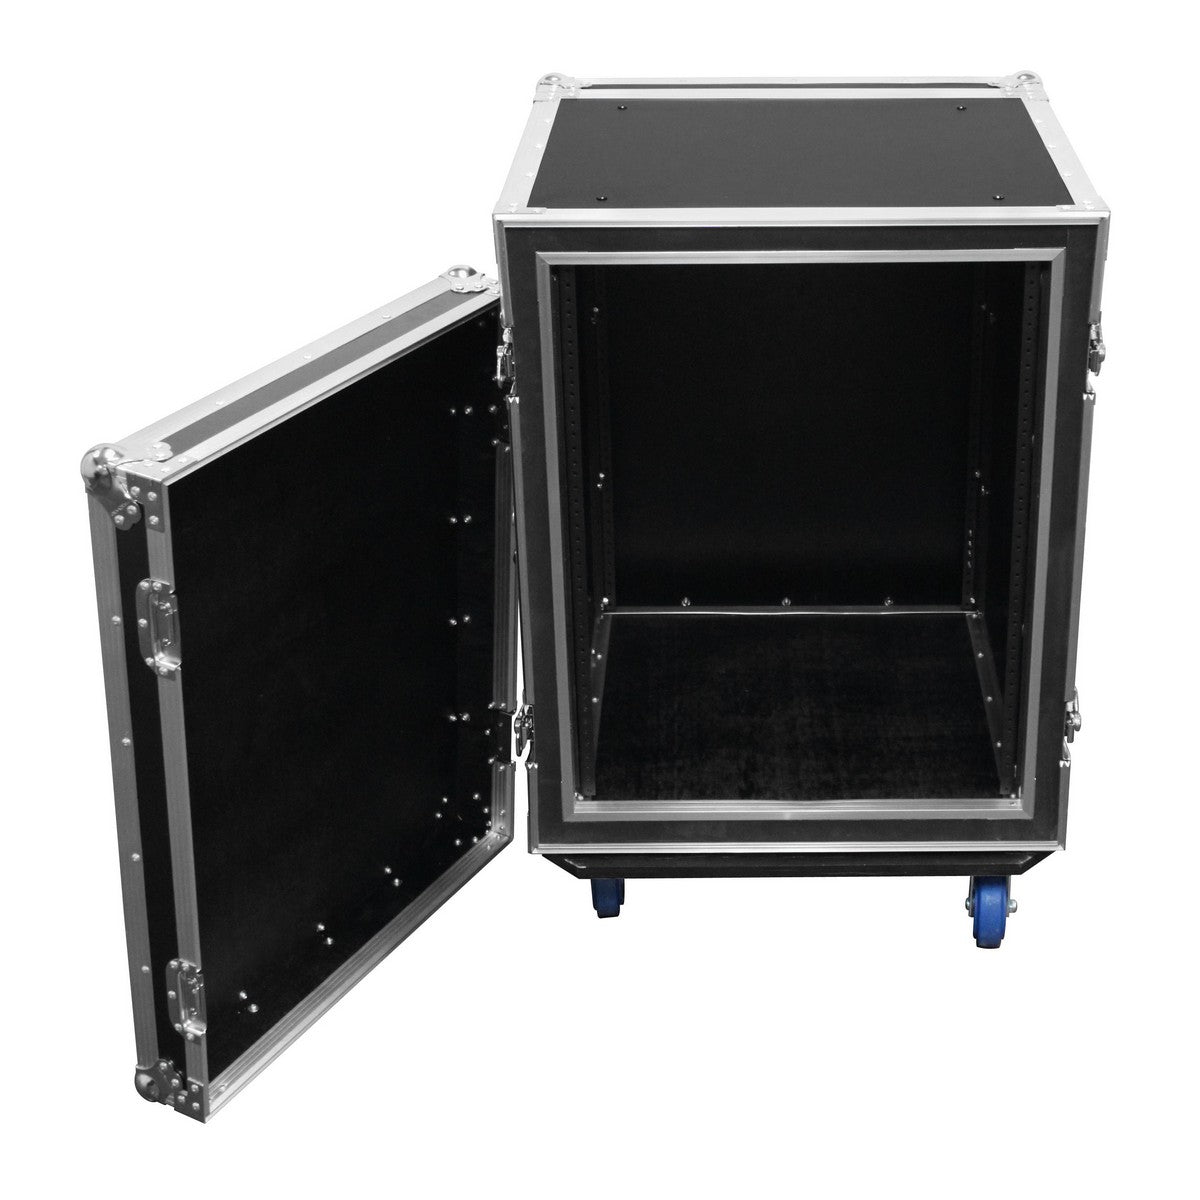 Odyssey Cases FZS14W | 14 Space 22" Rackable Depth Shock Mount Rack with Wheels